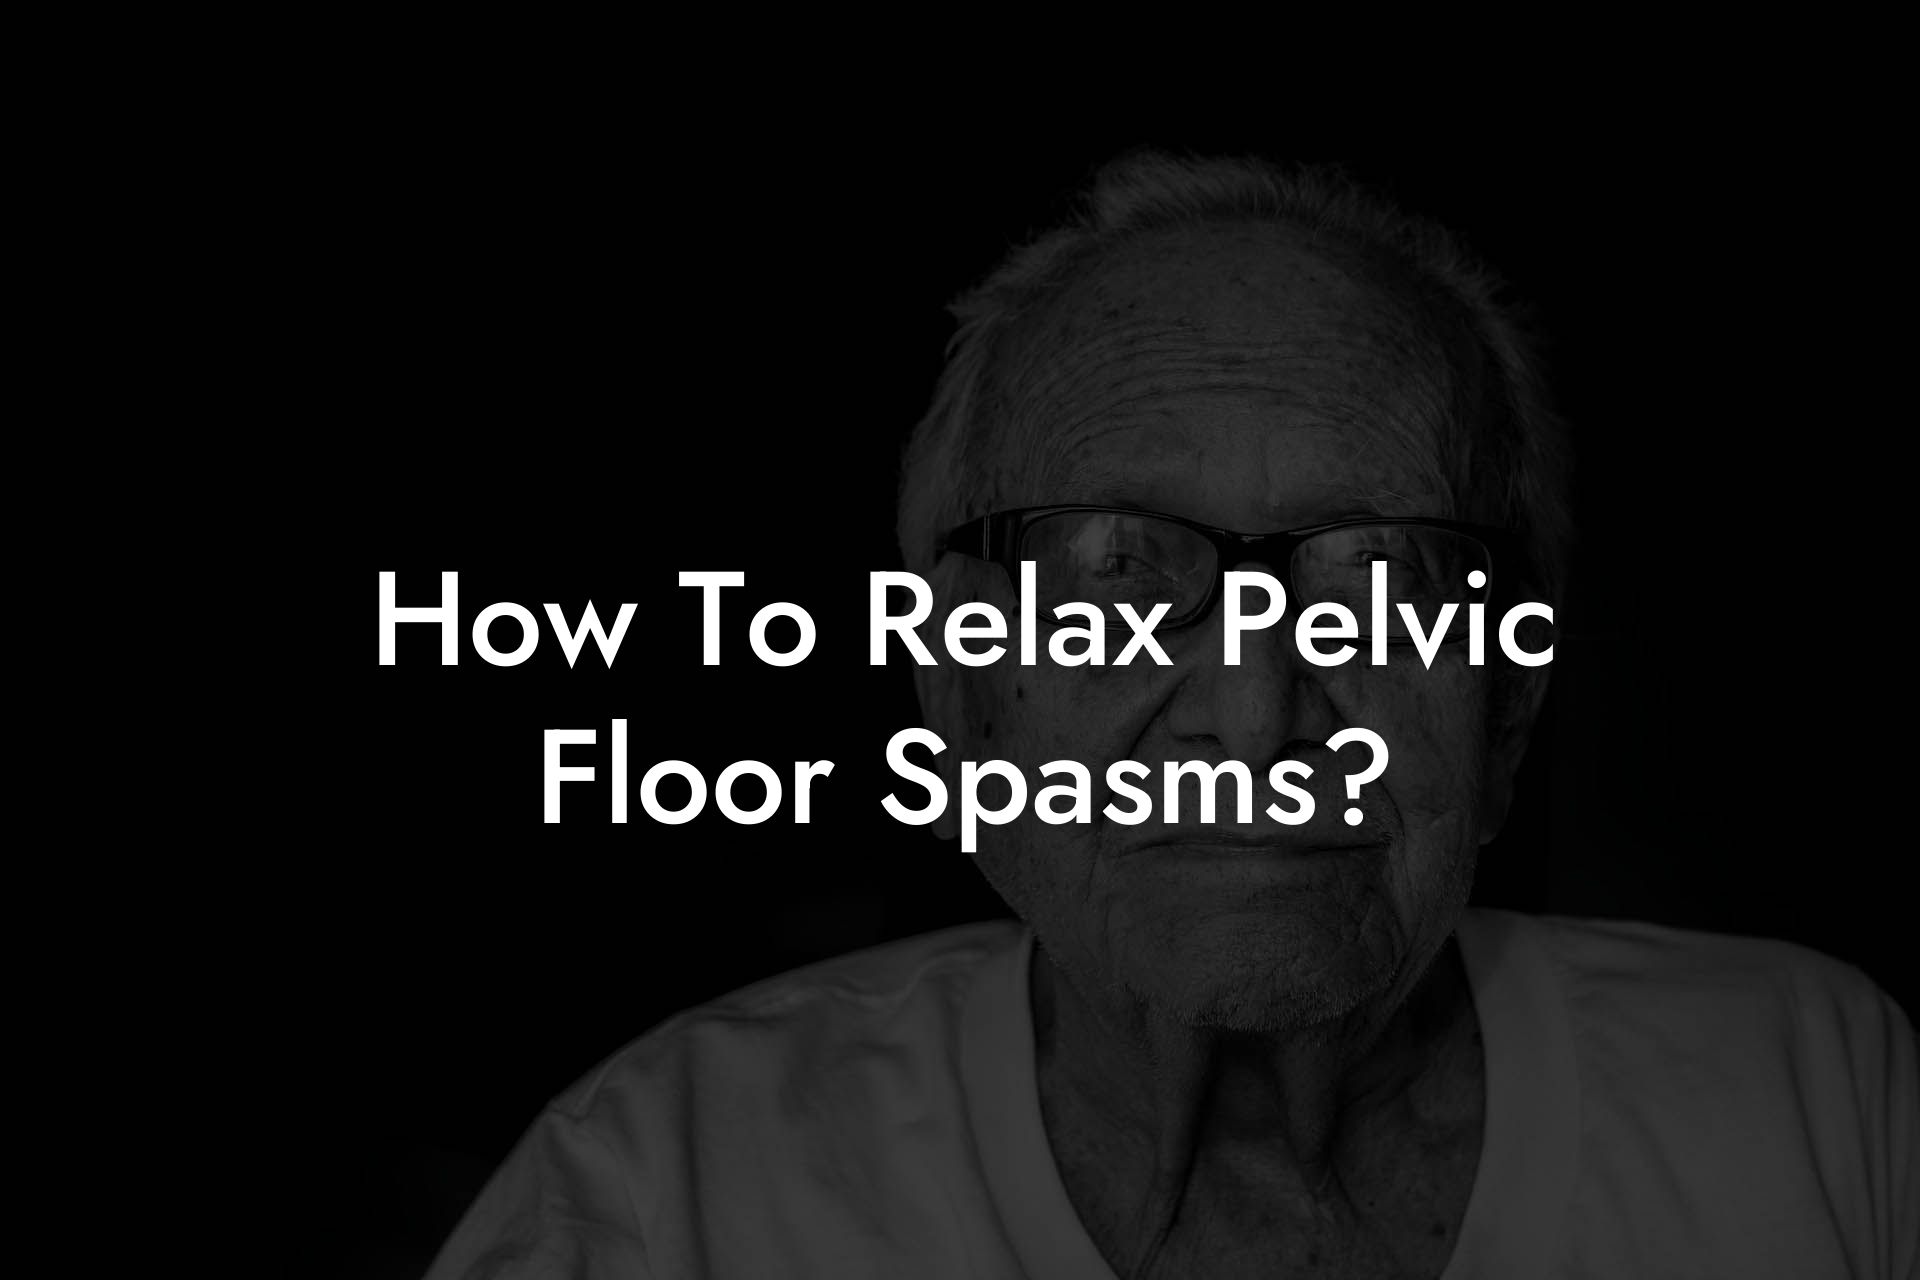 How To Relax Pelvic Floor Spasms?